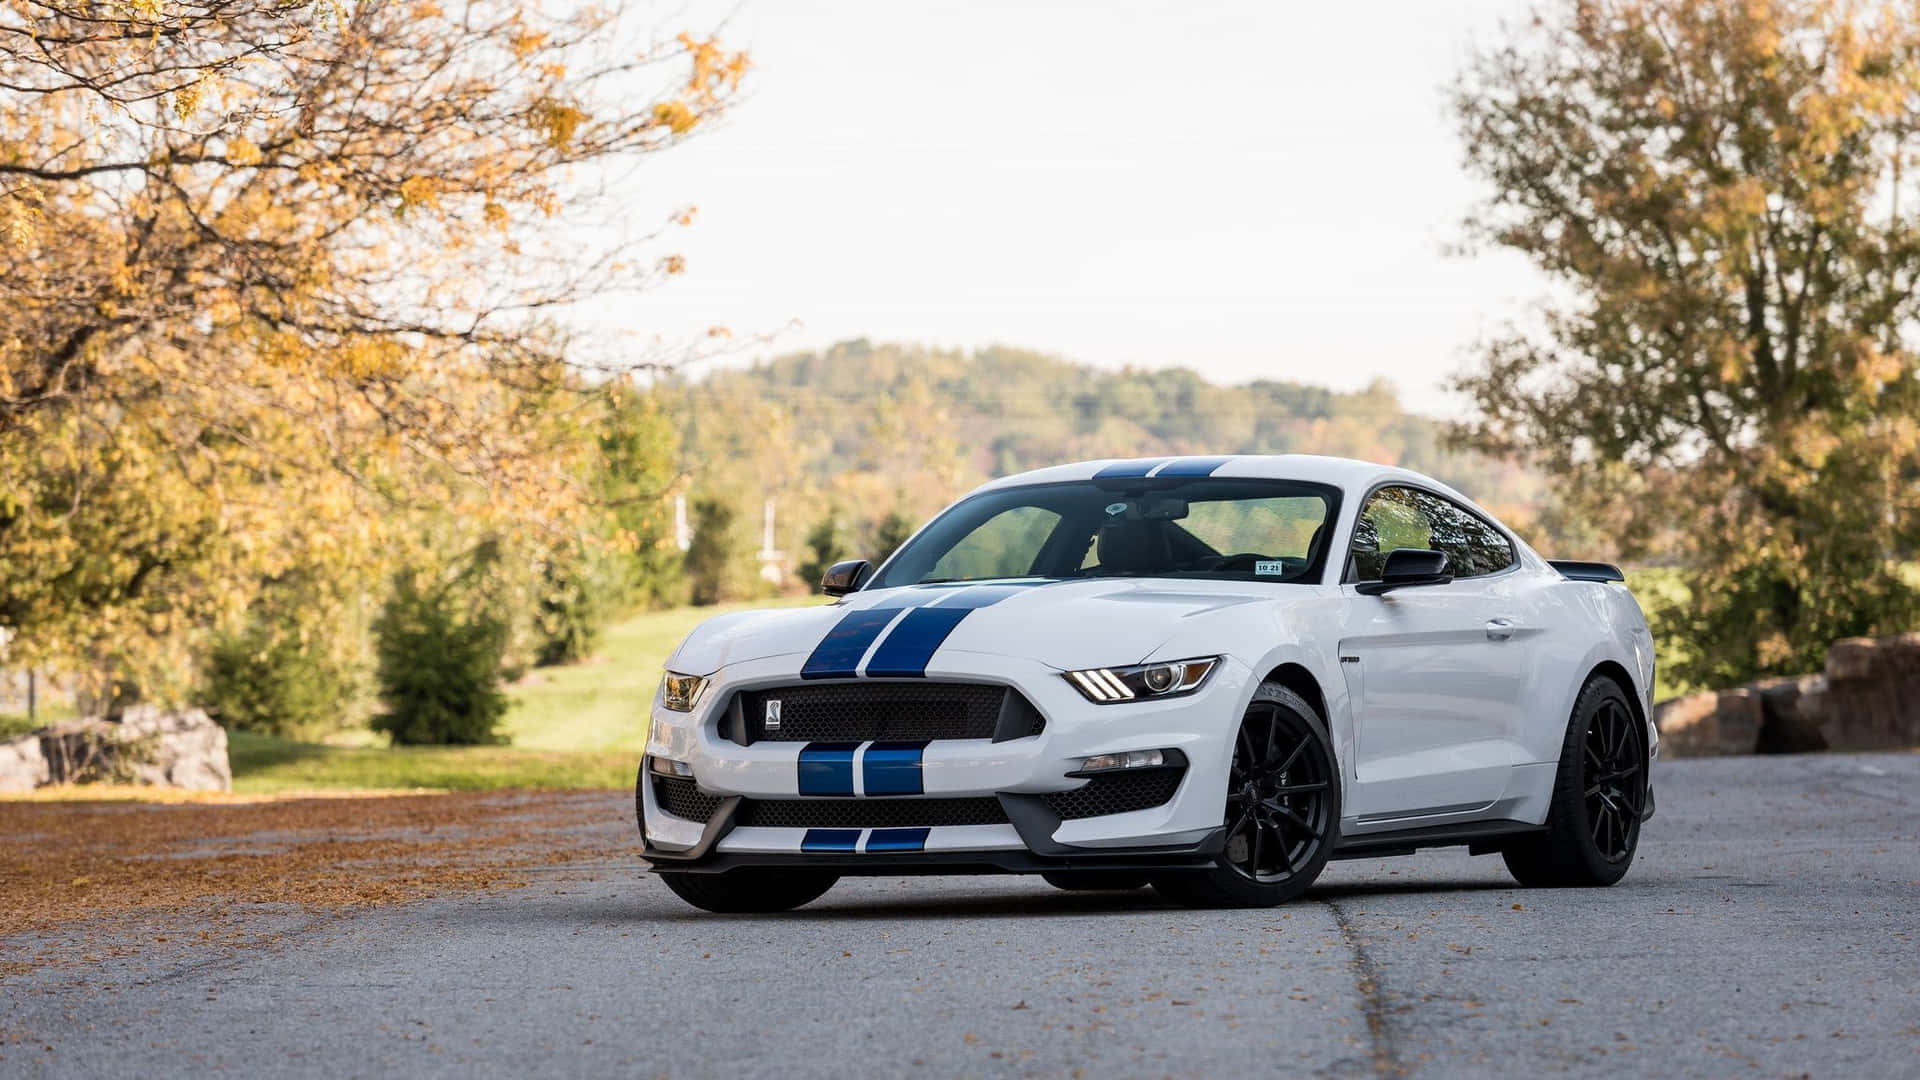 Stunning Ford Mustang Shelby GT350 in Action Wallpaper